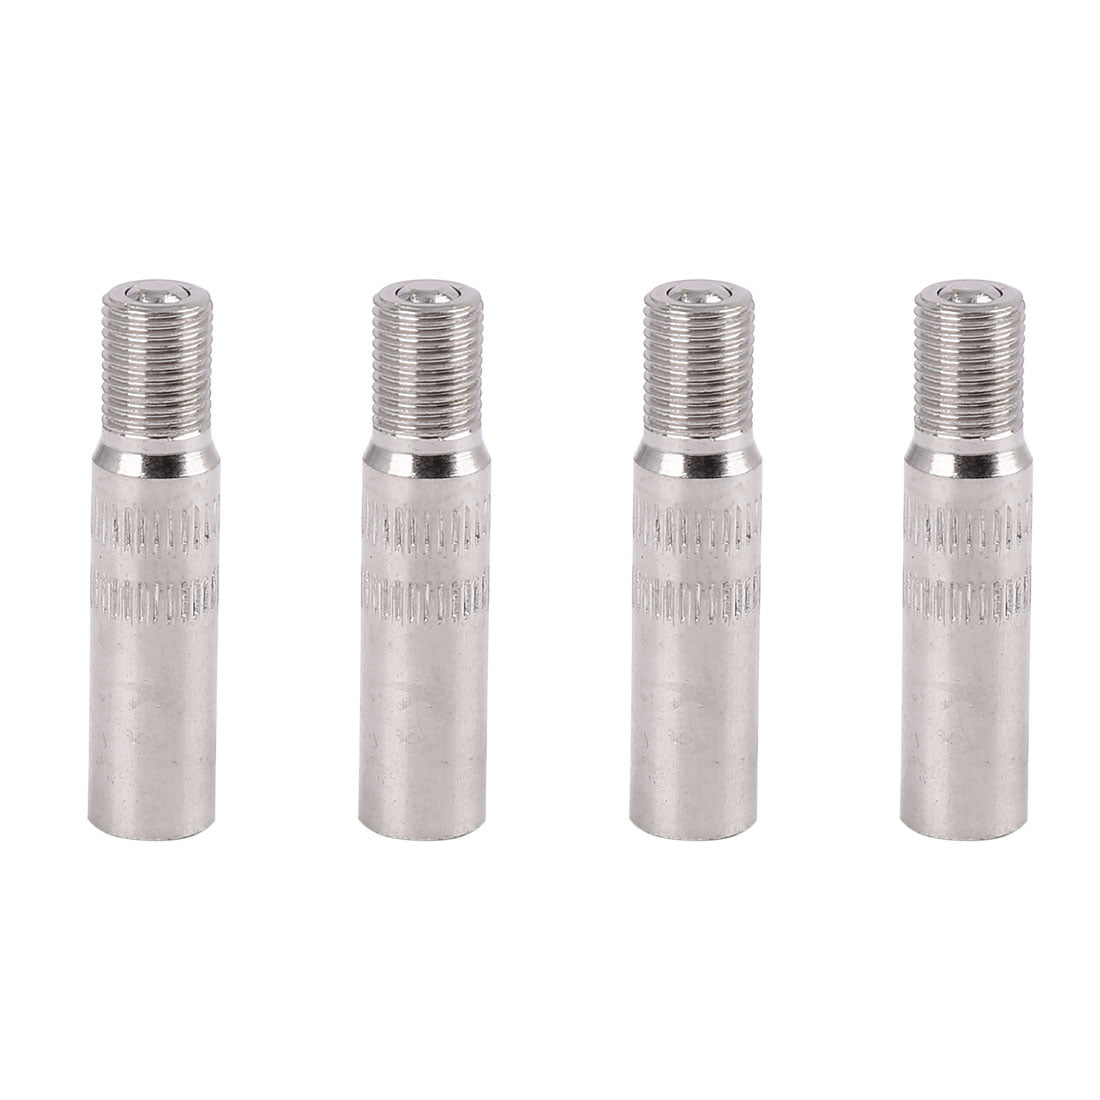 Pack of 4 Chieftain Automotive 2 Inch Plastic Tire Valve Stem Extensions